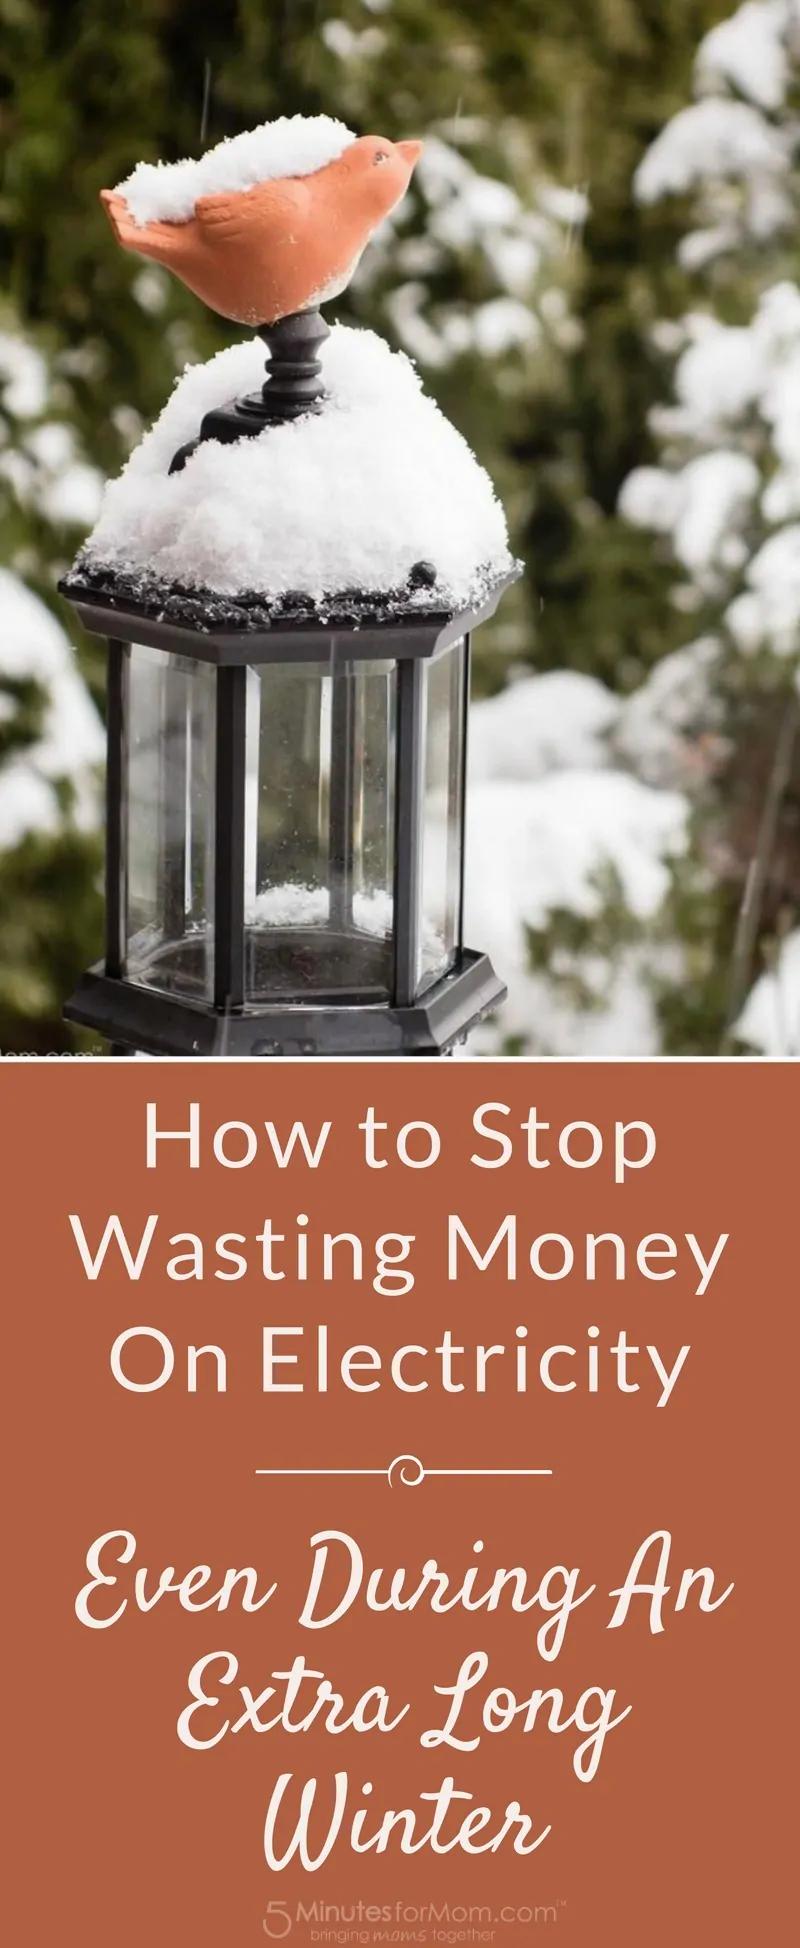 How to Stop Wasting Money on Electricity even during an extra long winter